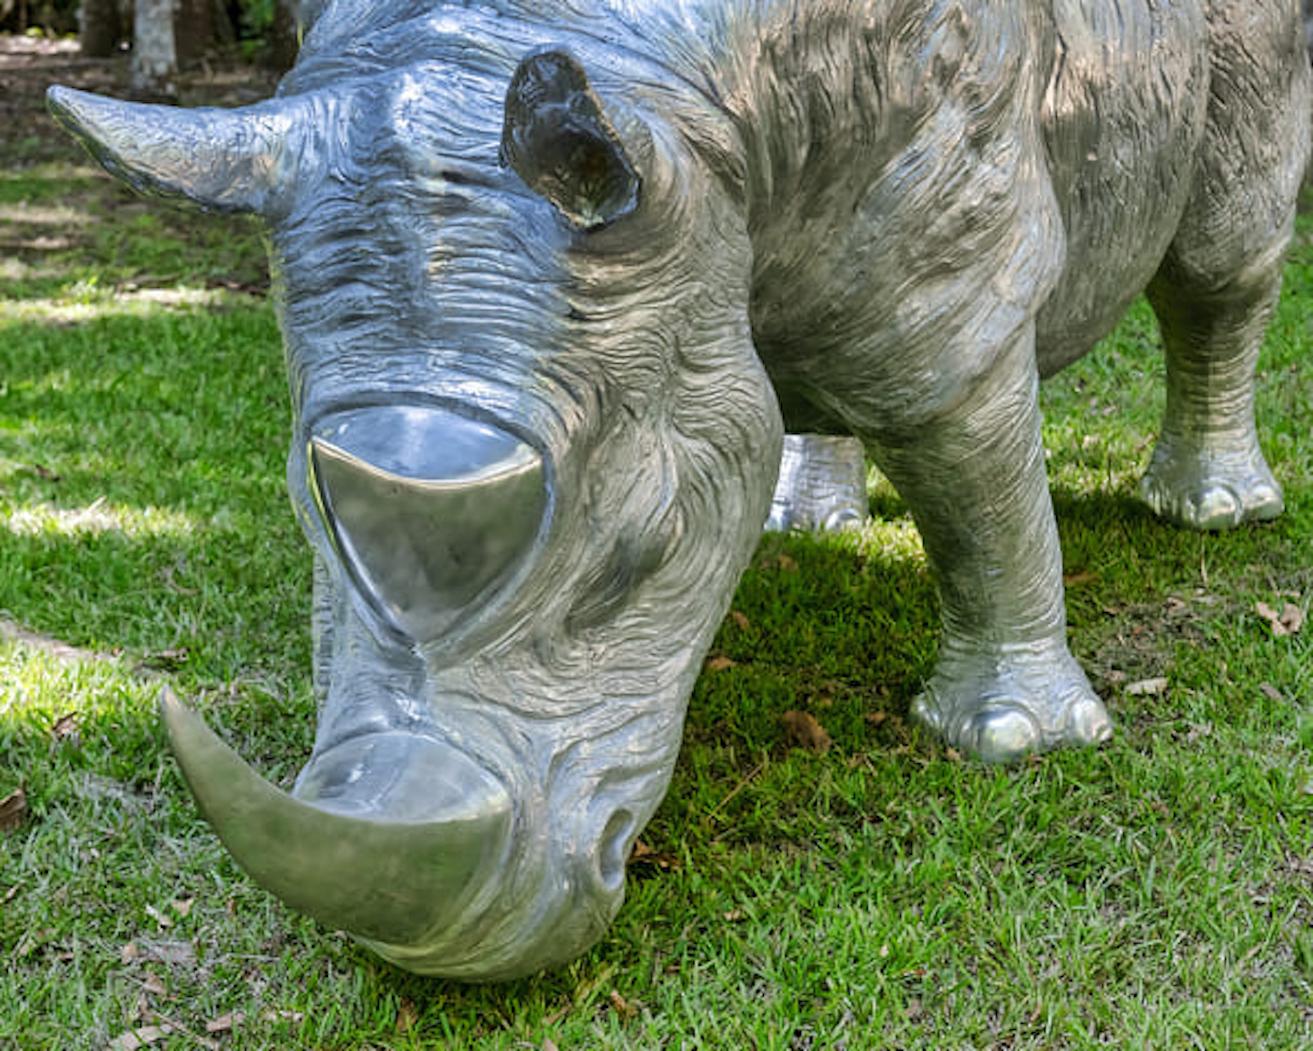 'Rhino a la Charge' Life Size - Sculpture by Christian Maas